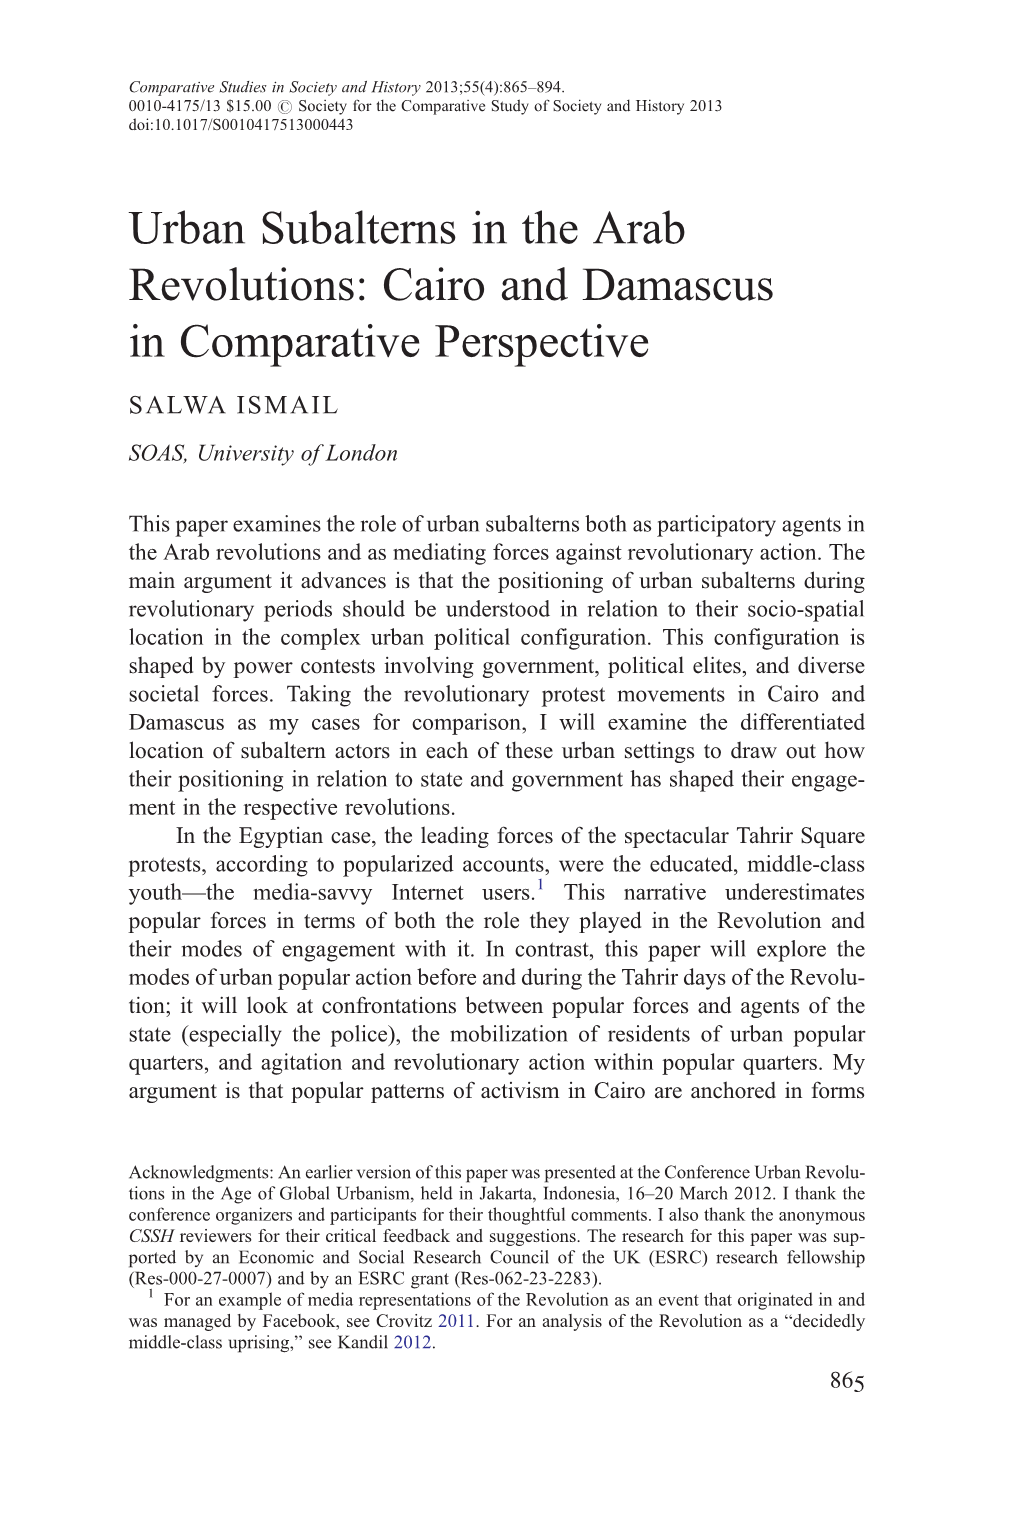 Urban Subalterns in the Arab Revolutions: Cairo and Damascus in Comparative Perspective